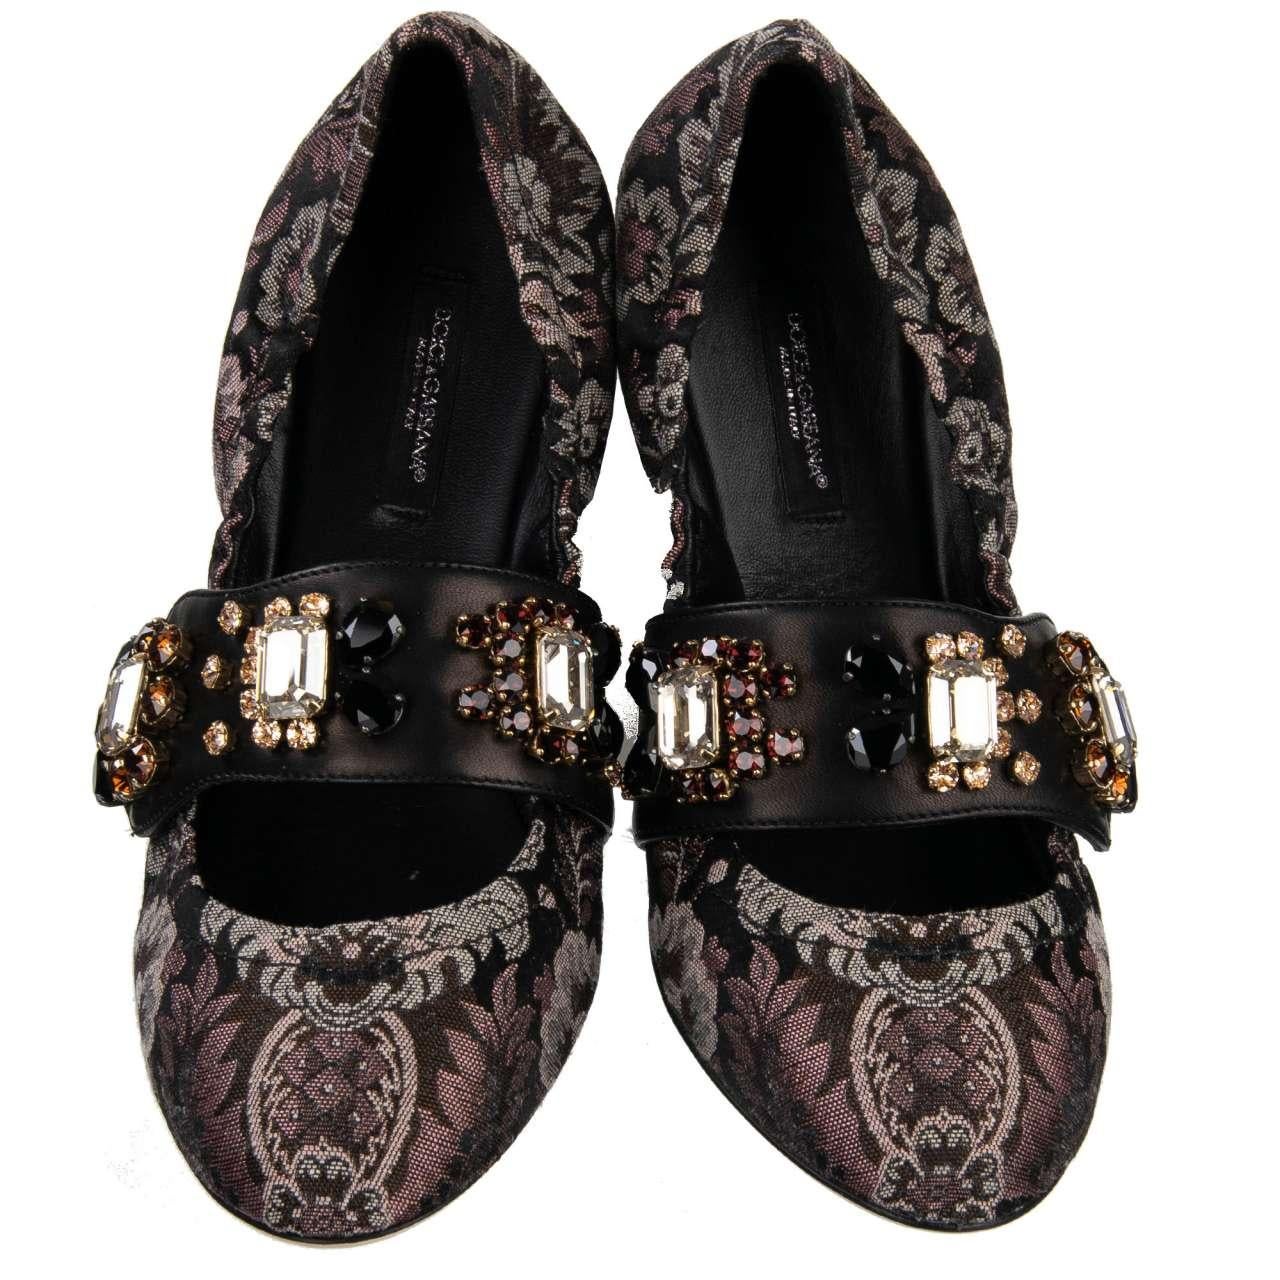 Dolce & Gabbana - Brocade Ballet Flats VALLY with Crystals 38.5 For Sale 2